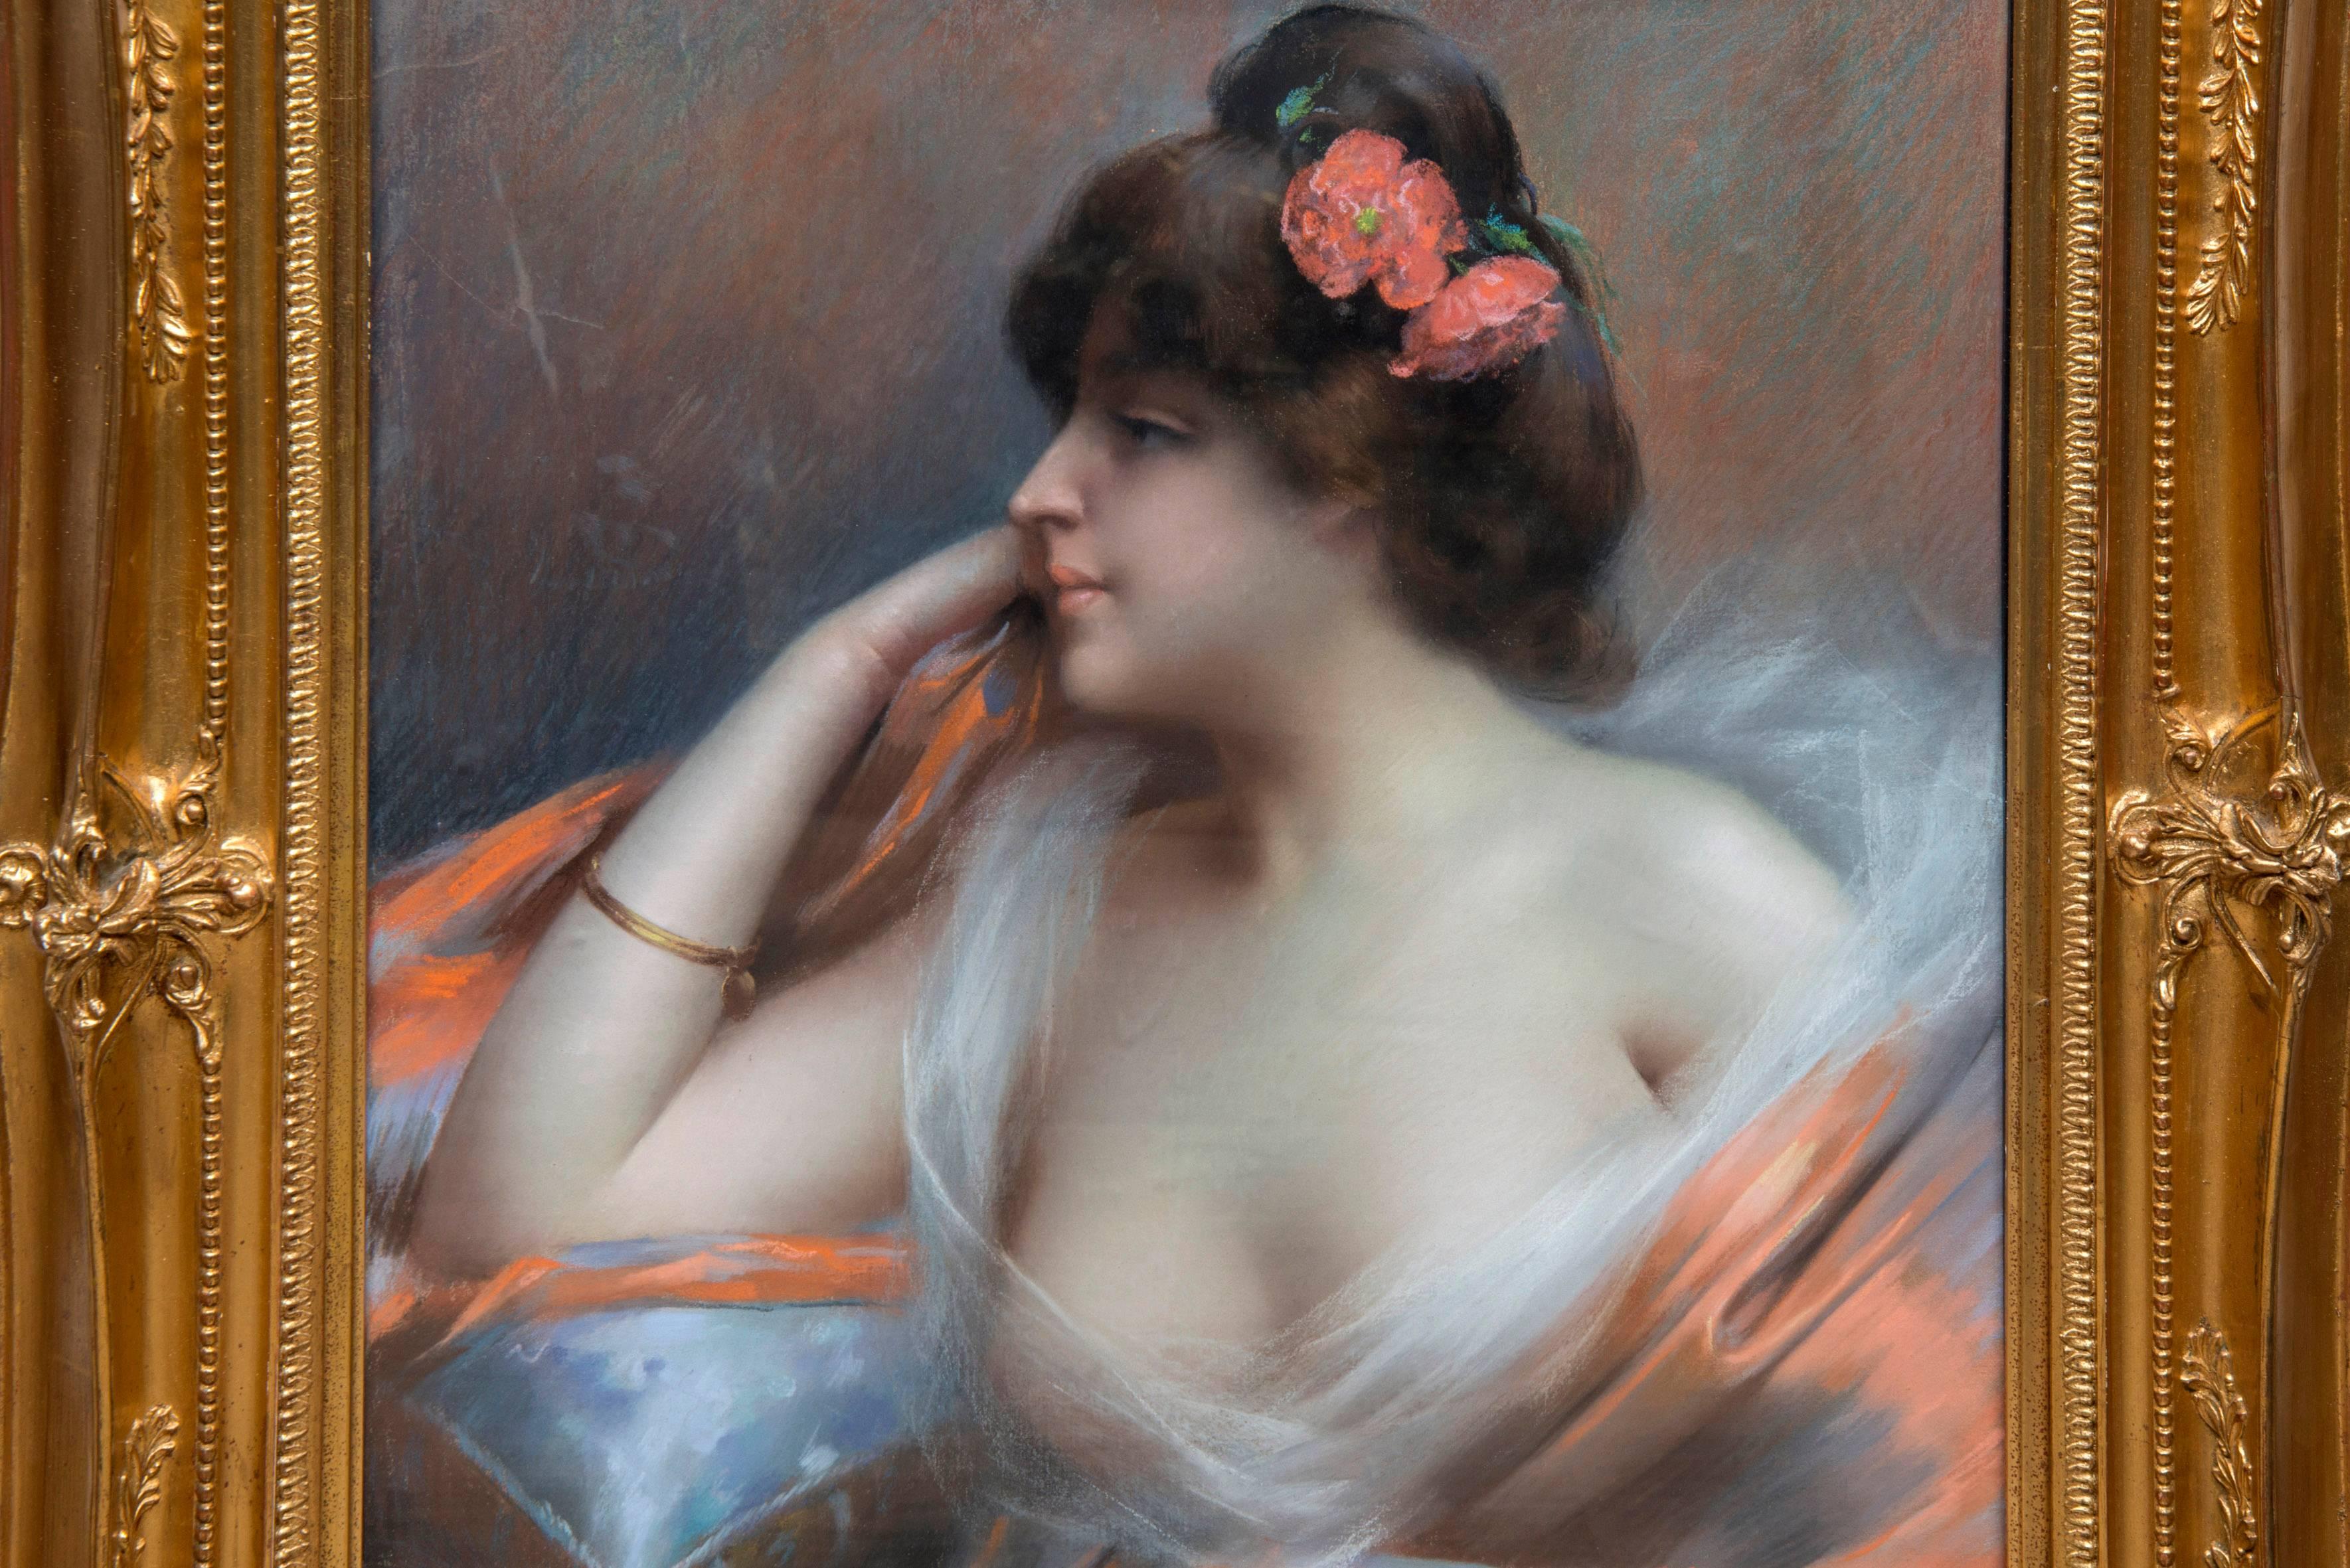 Delphin Enjolras 1857-1945, specialist of pastels and women portraits
Portrait of an elegant woman
Pastel on canvas
Signed at the top right
Measures: 72 x 60 cm.